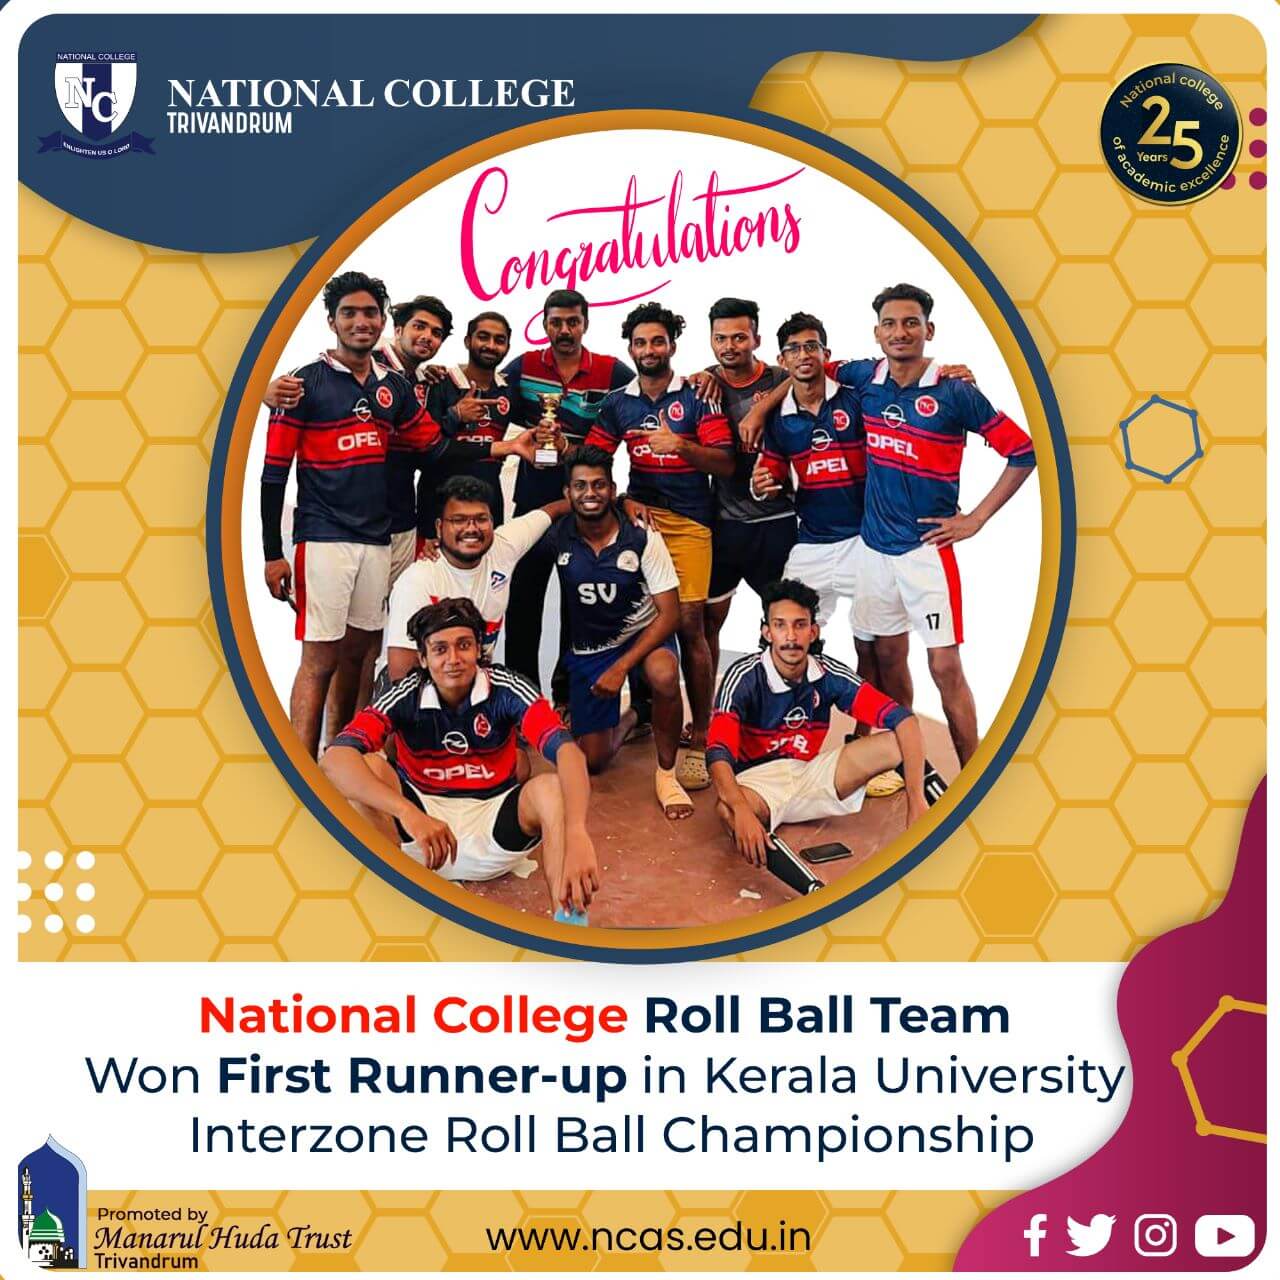 First Runner-up title in Kerala University Roll Ball Championship